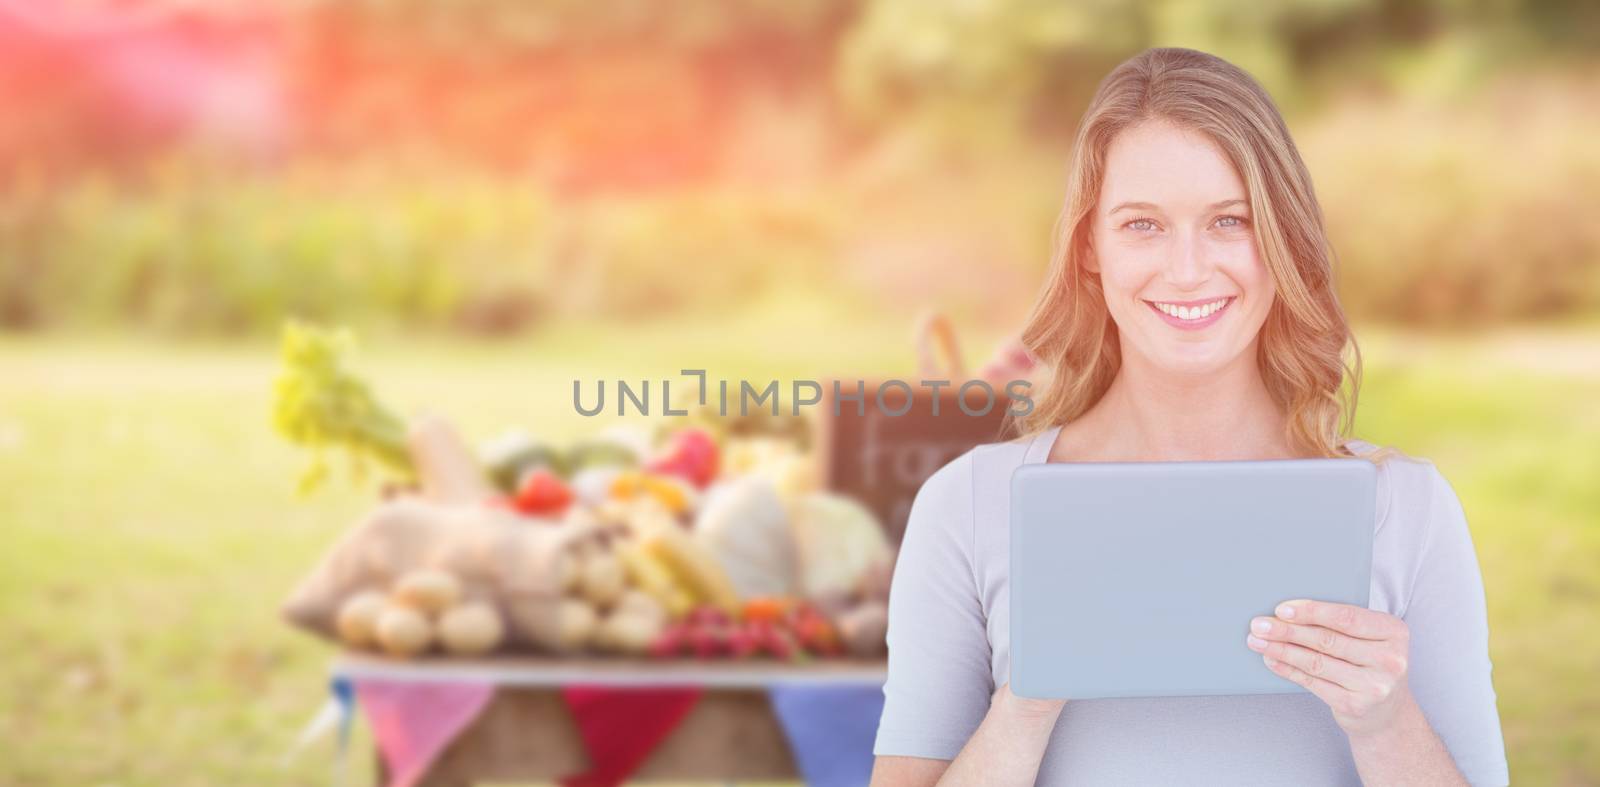 Portrait of happy woman holding digital tablet against food with slate on table